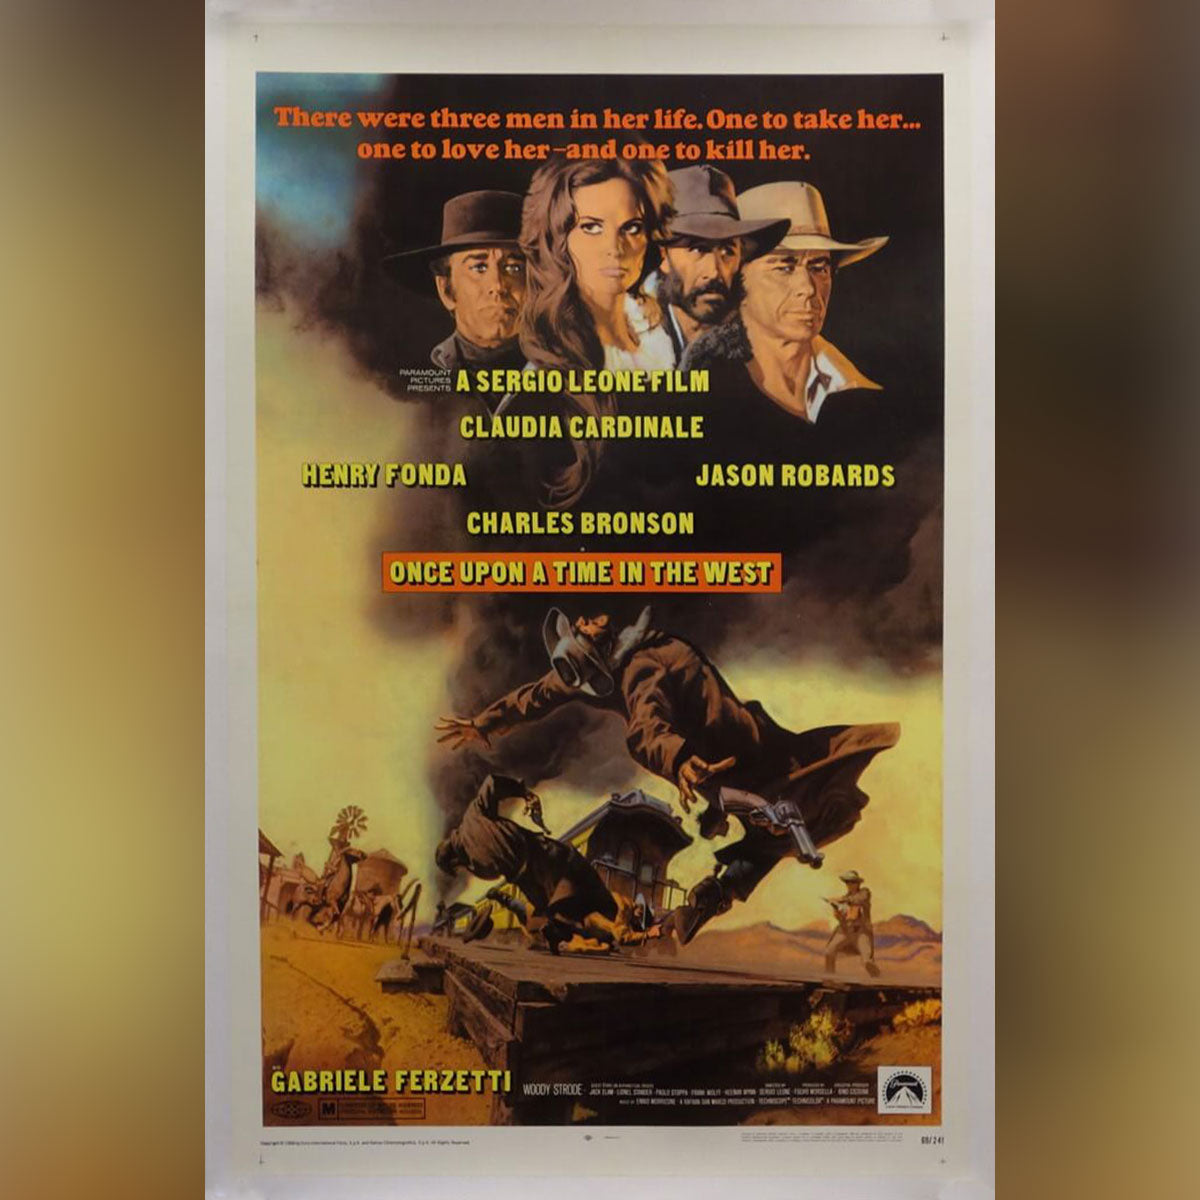 One Upon A Time In The West (1969)